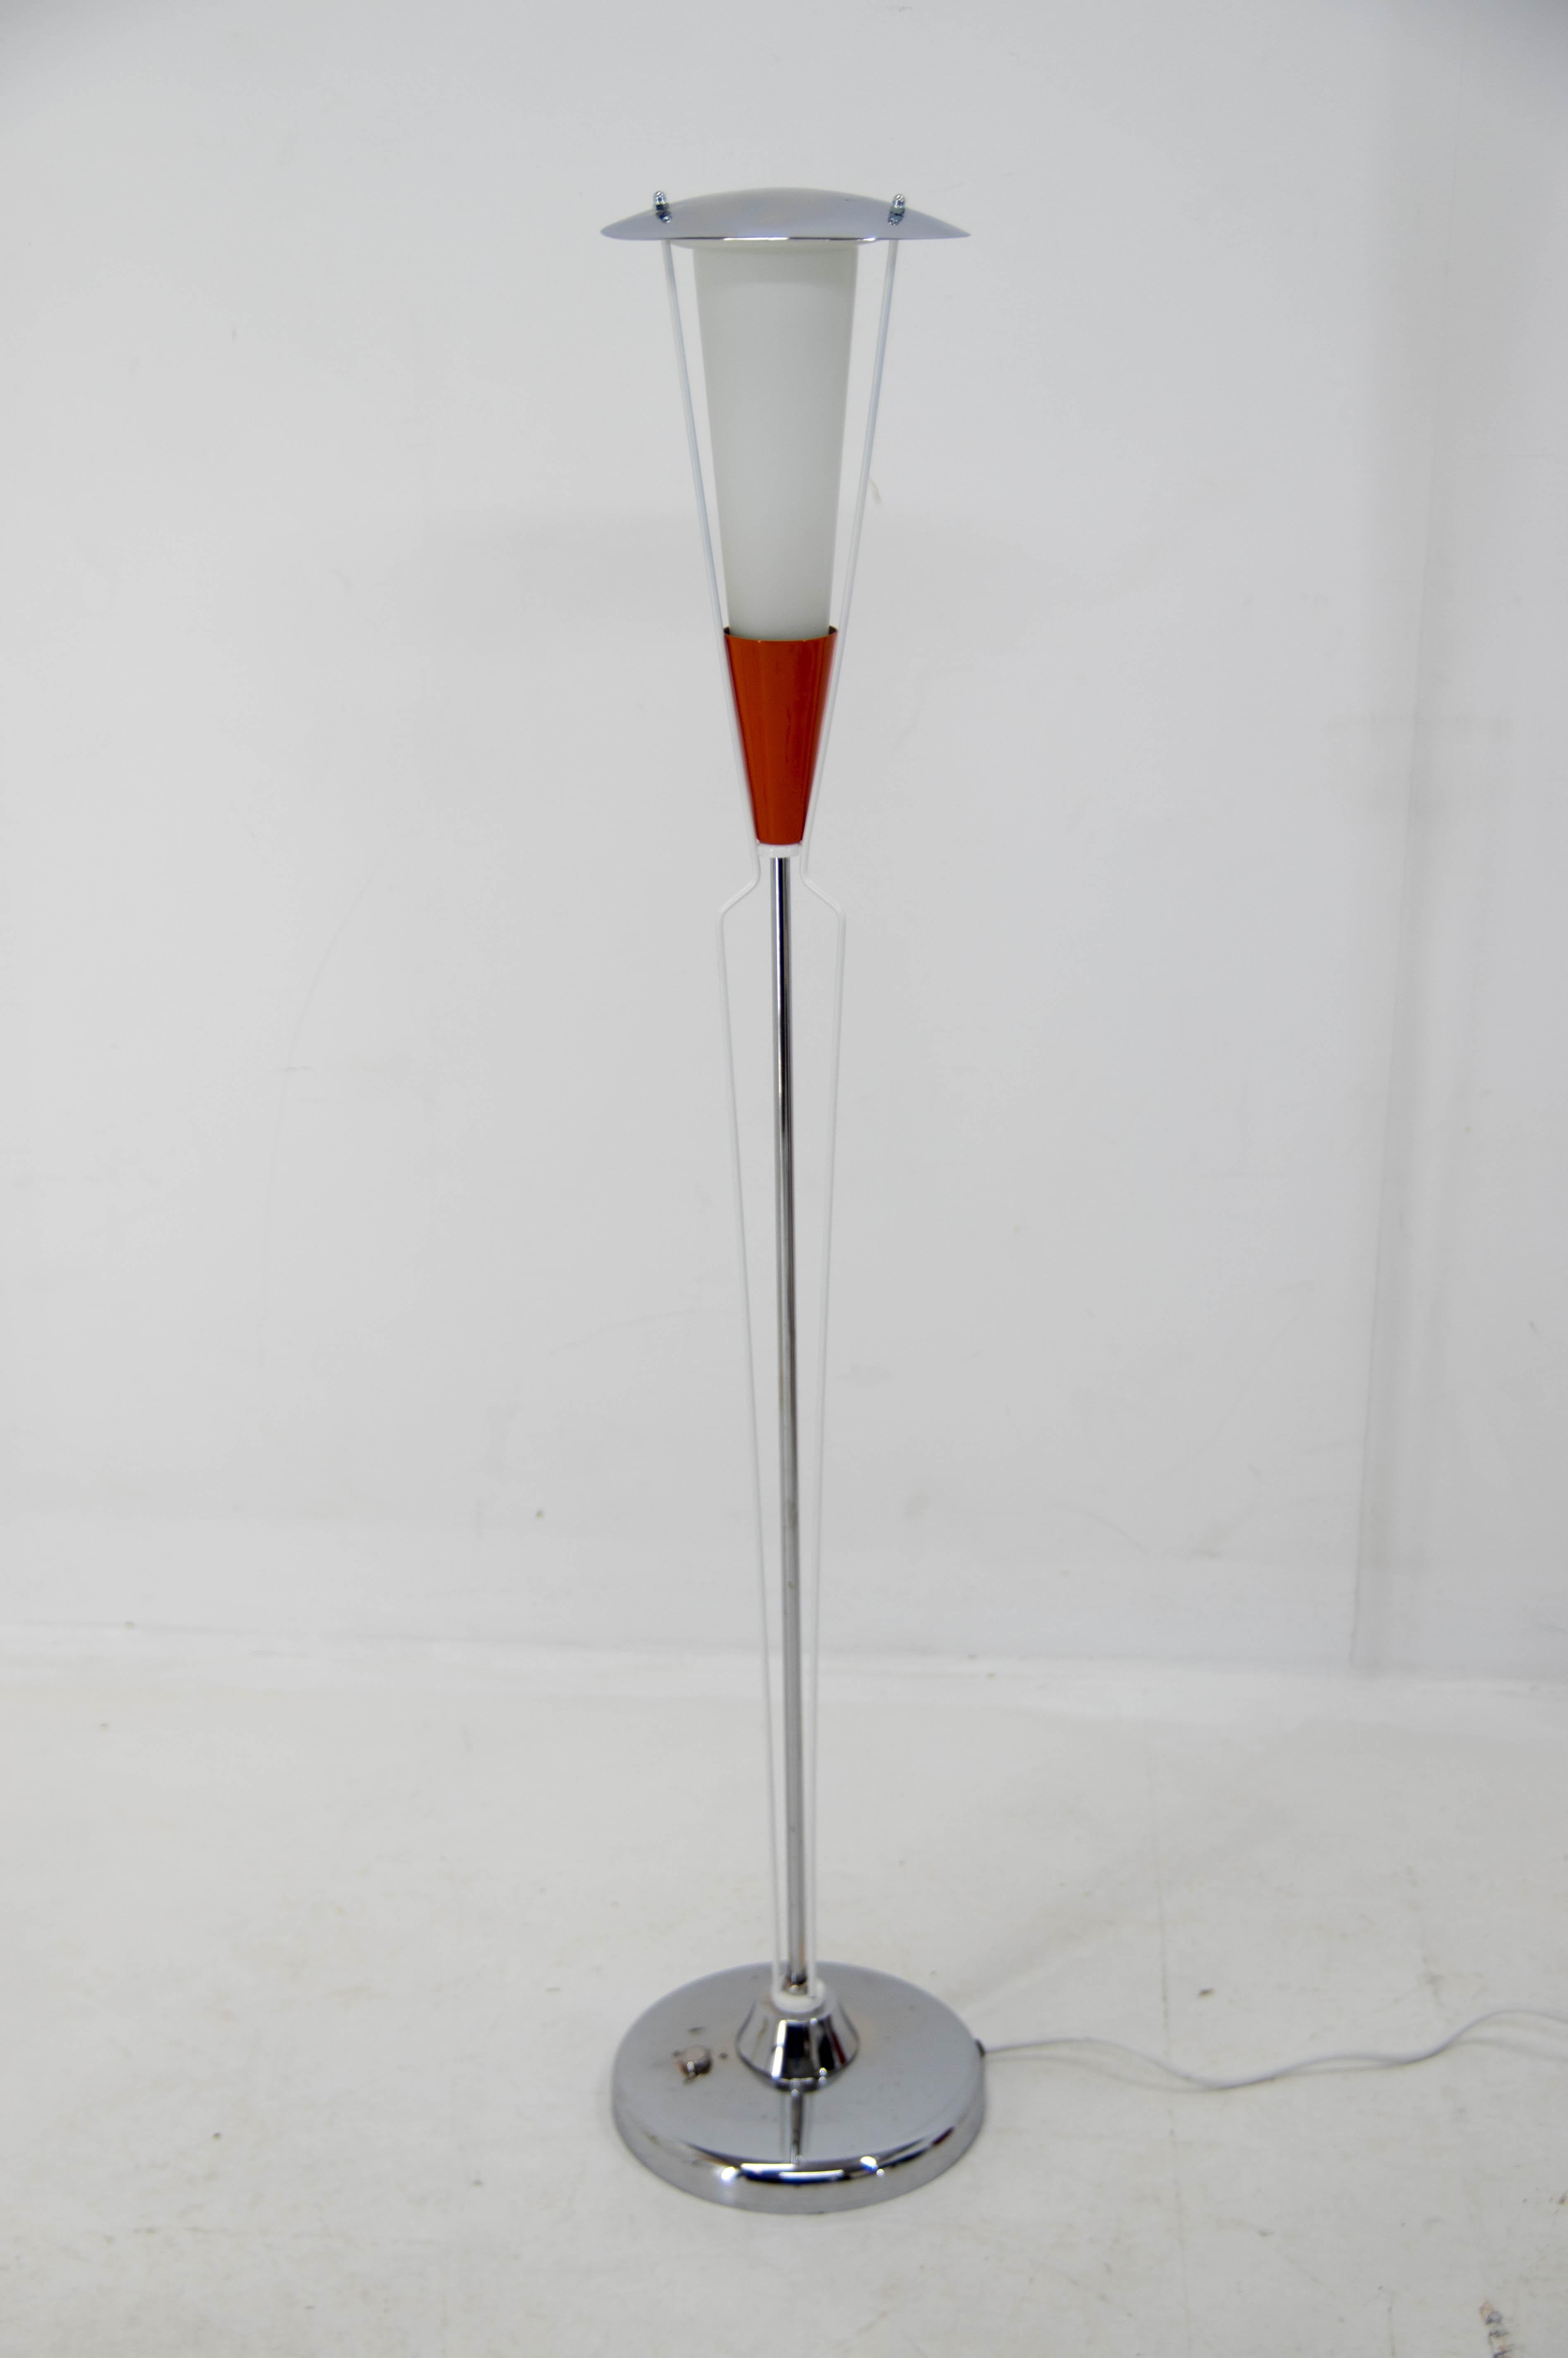 Very rare floor lamp made b DRUKOV in Czechoslovakia in 1960s
Restored: new orange and white lacquer.
Original chrome with little age patina polished.
Rewired: 1x60W, E25-E27 bulb
US plug adapter included.